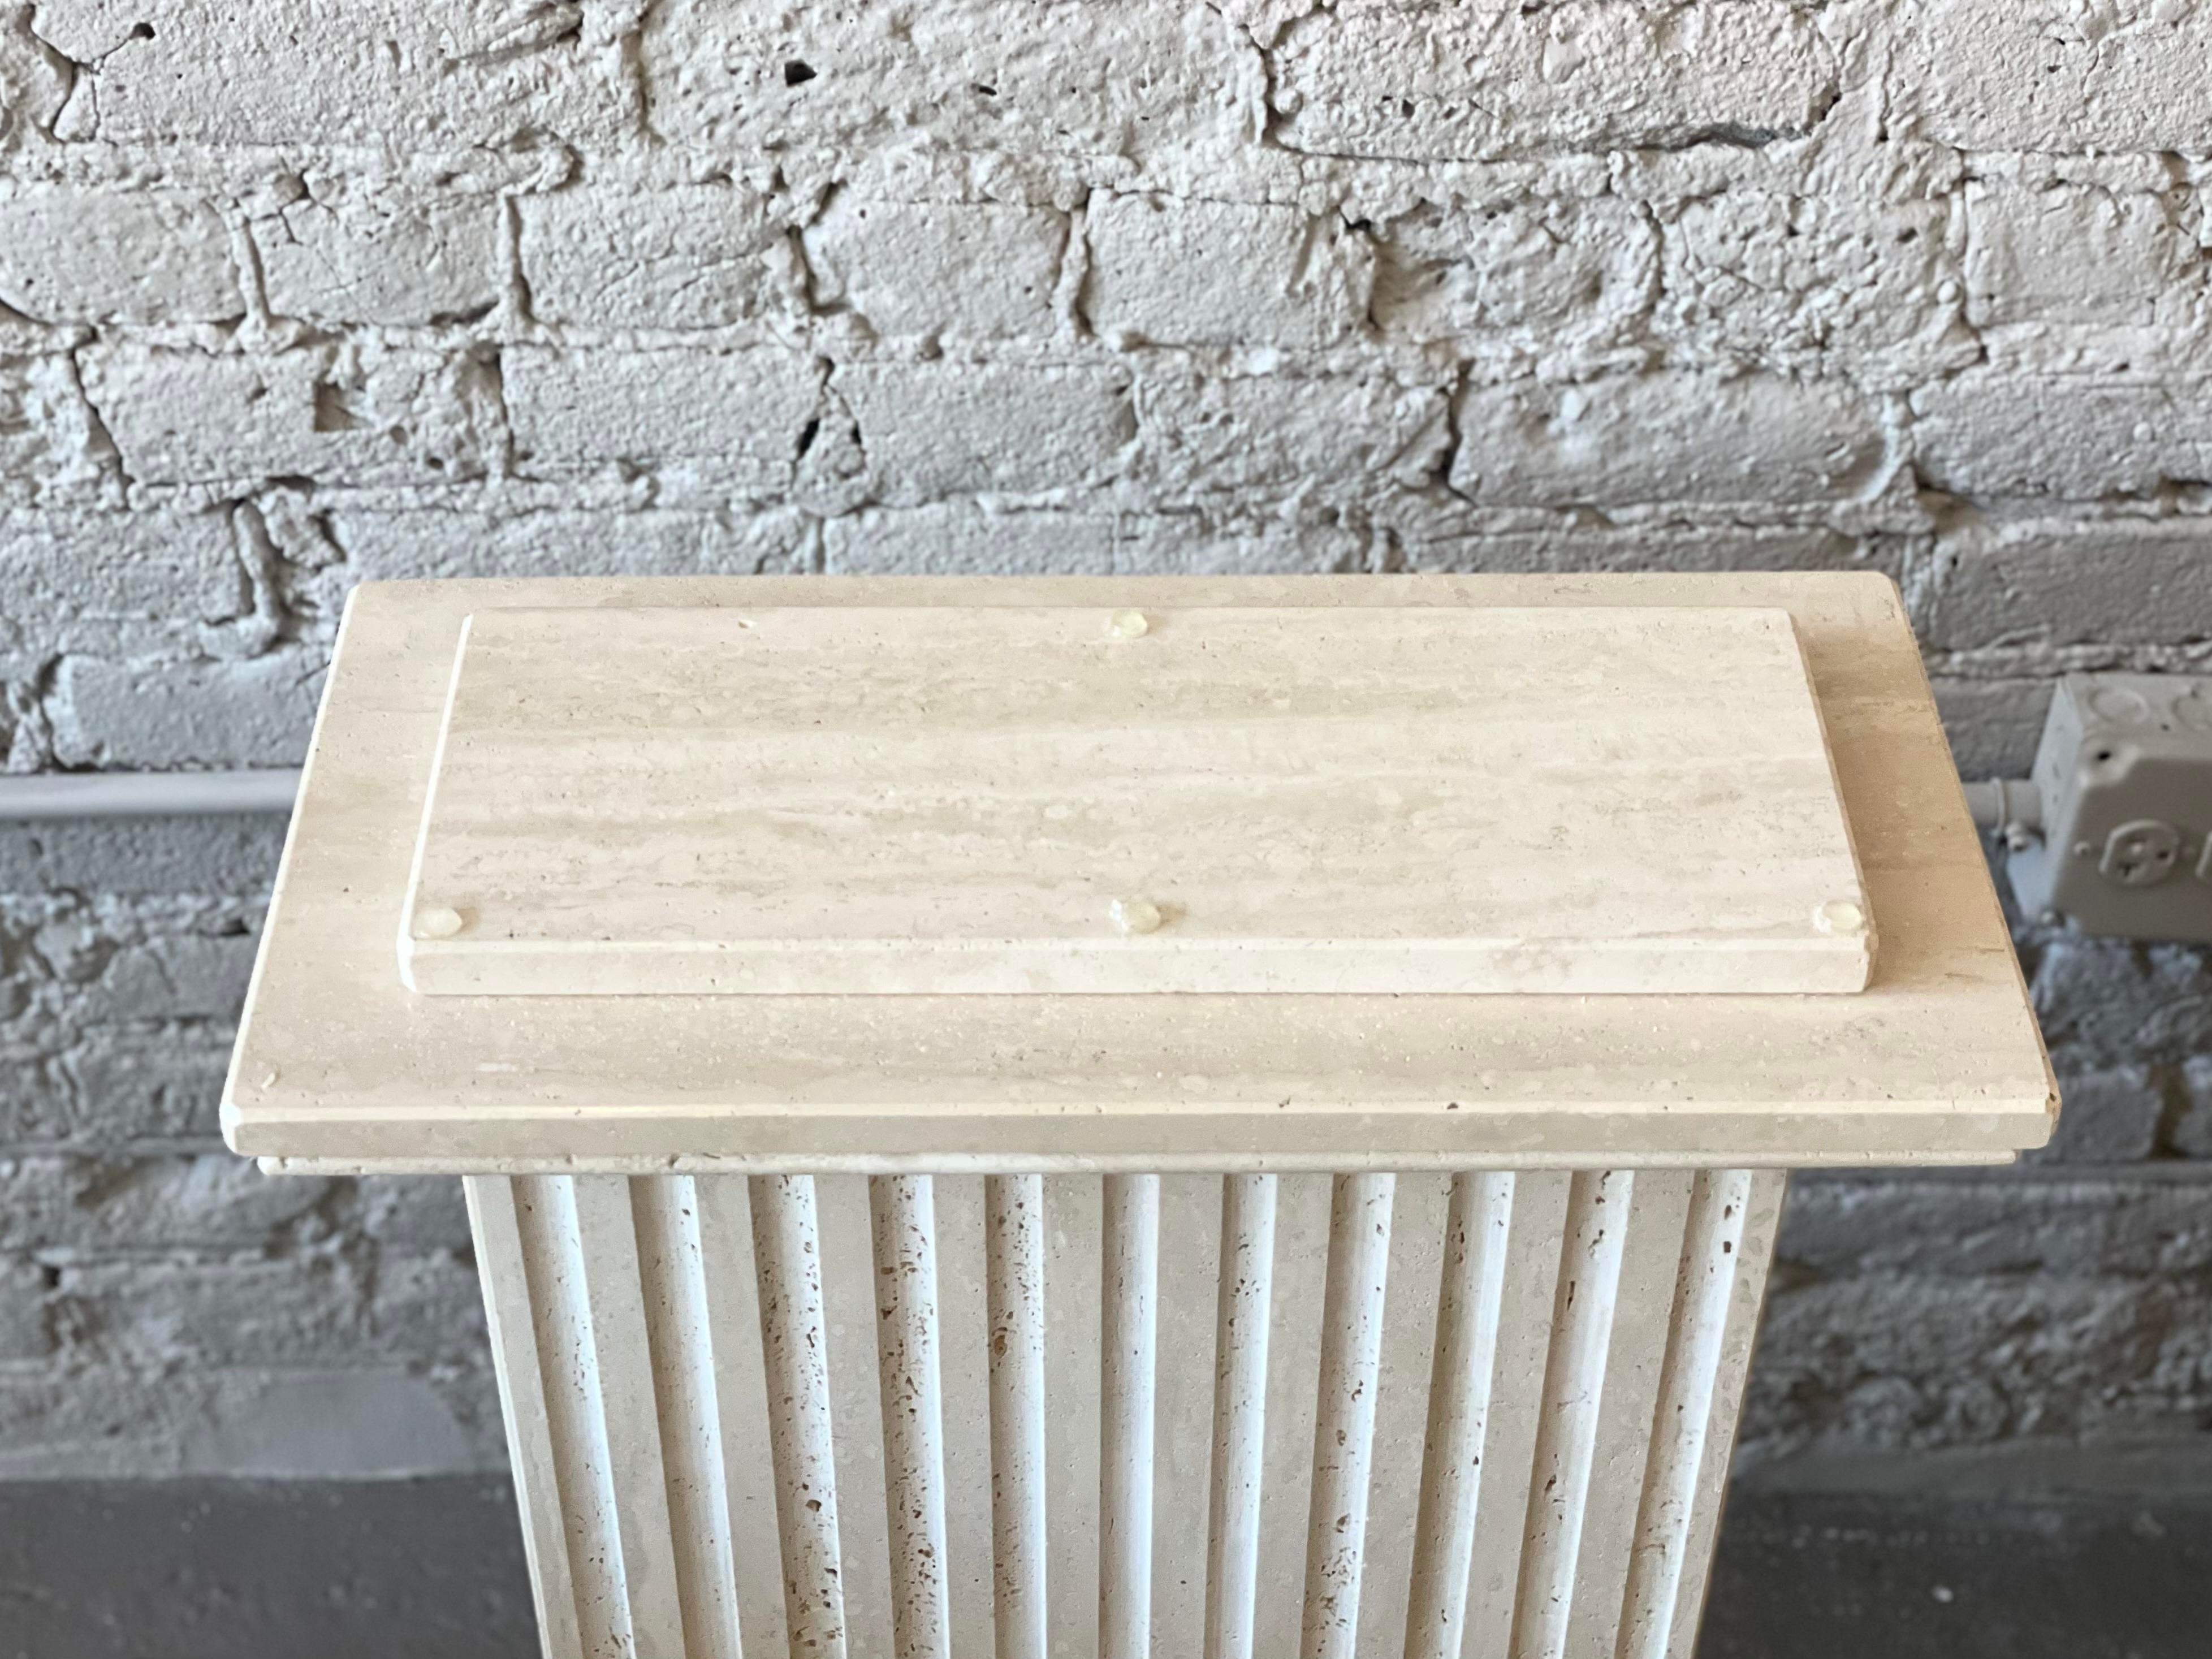 Beautiful, elegant, simple pair of travertine postmodern pedestals. These are so heavy! I think they are absolutely solid stone. Use as pedestals with decor on top or as bases for a dining table.